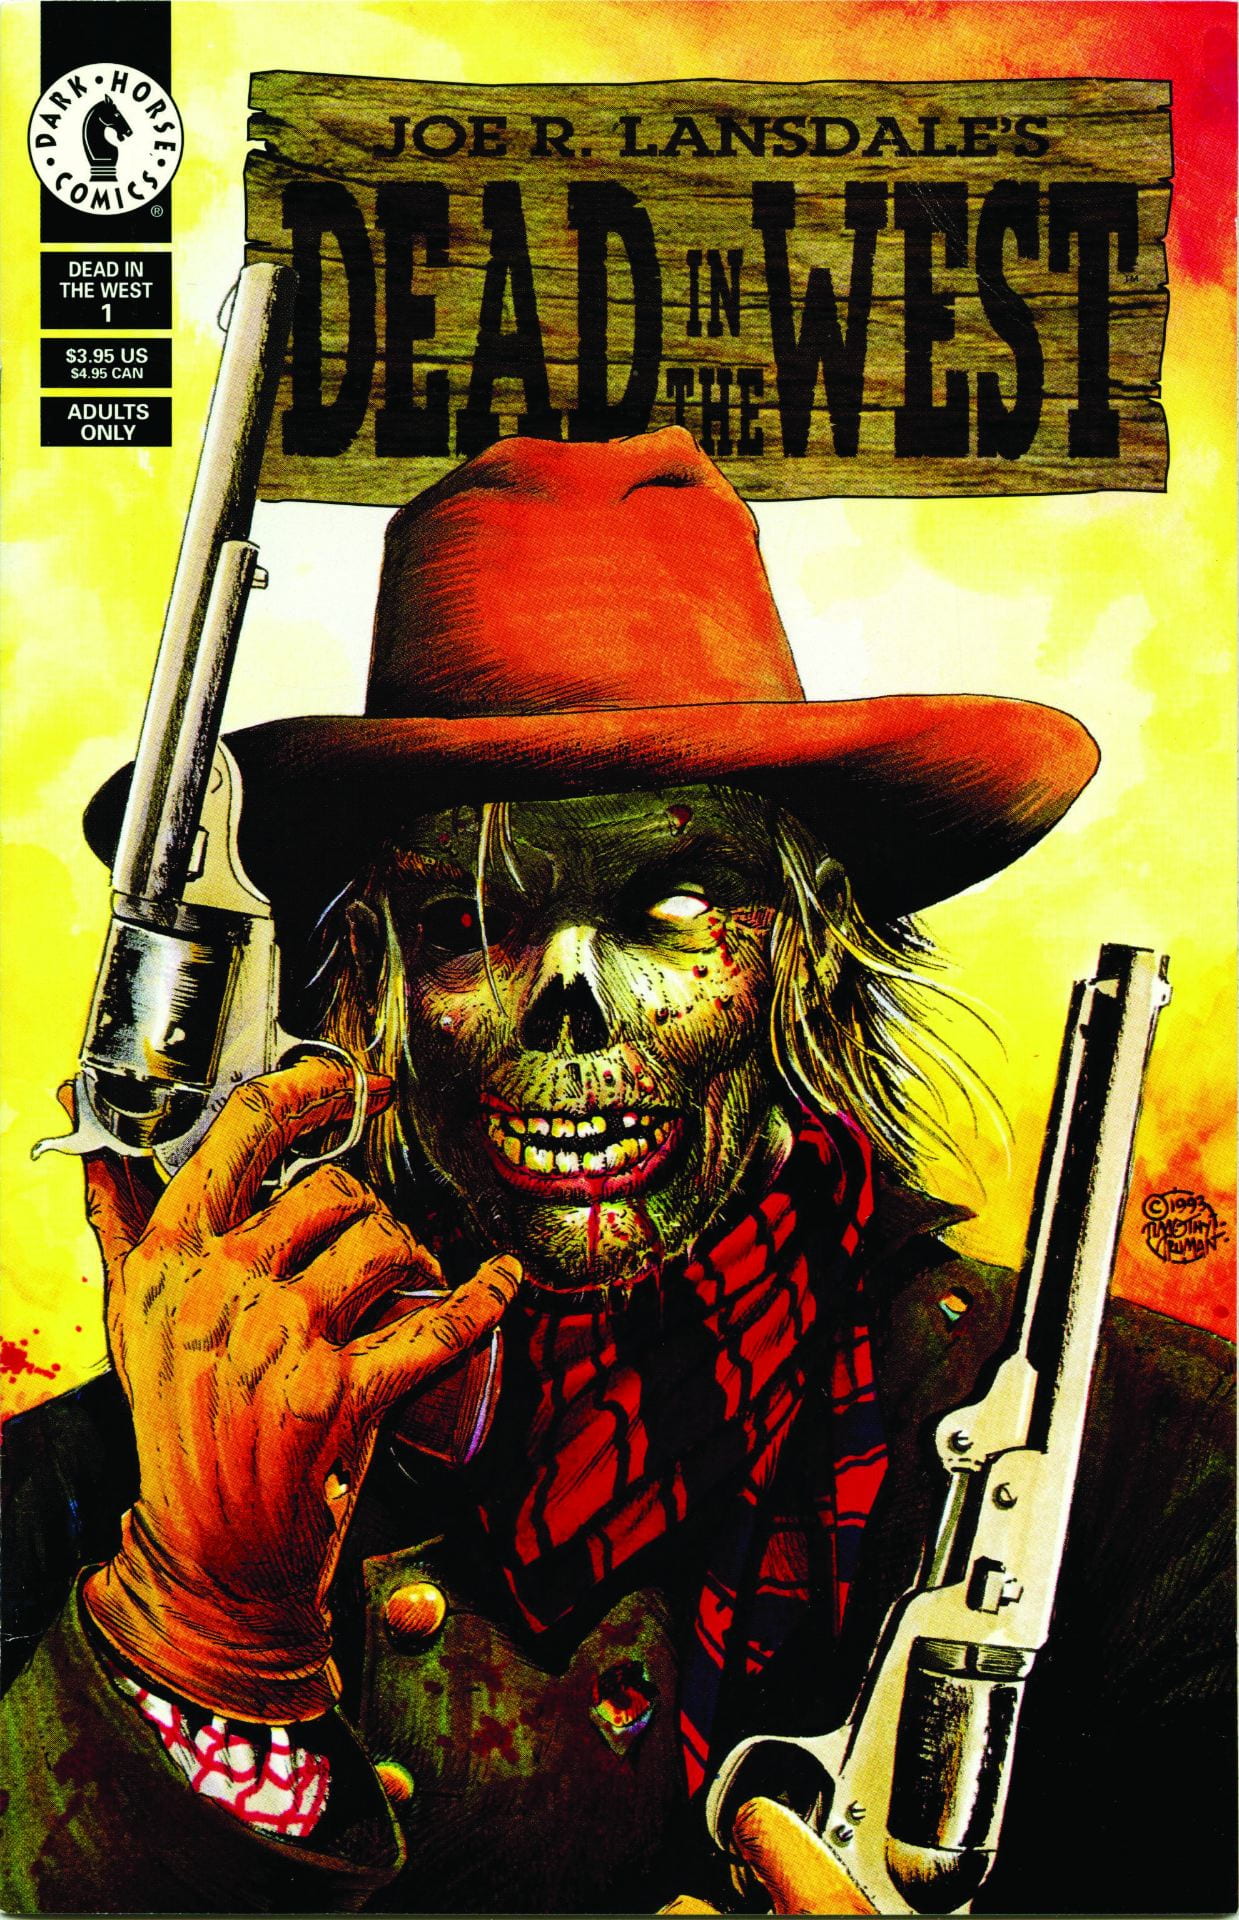 Dead In The West book cover